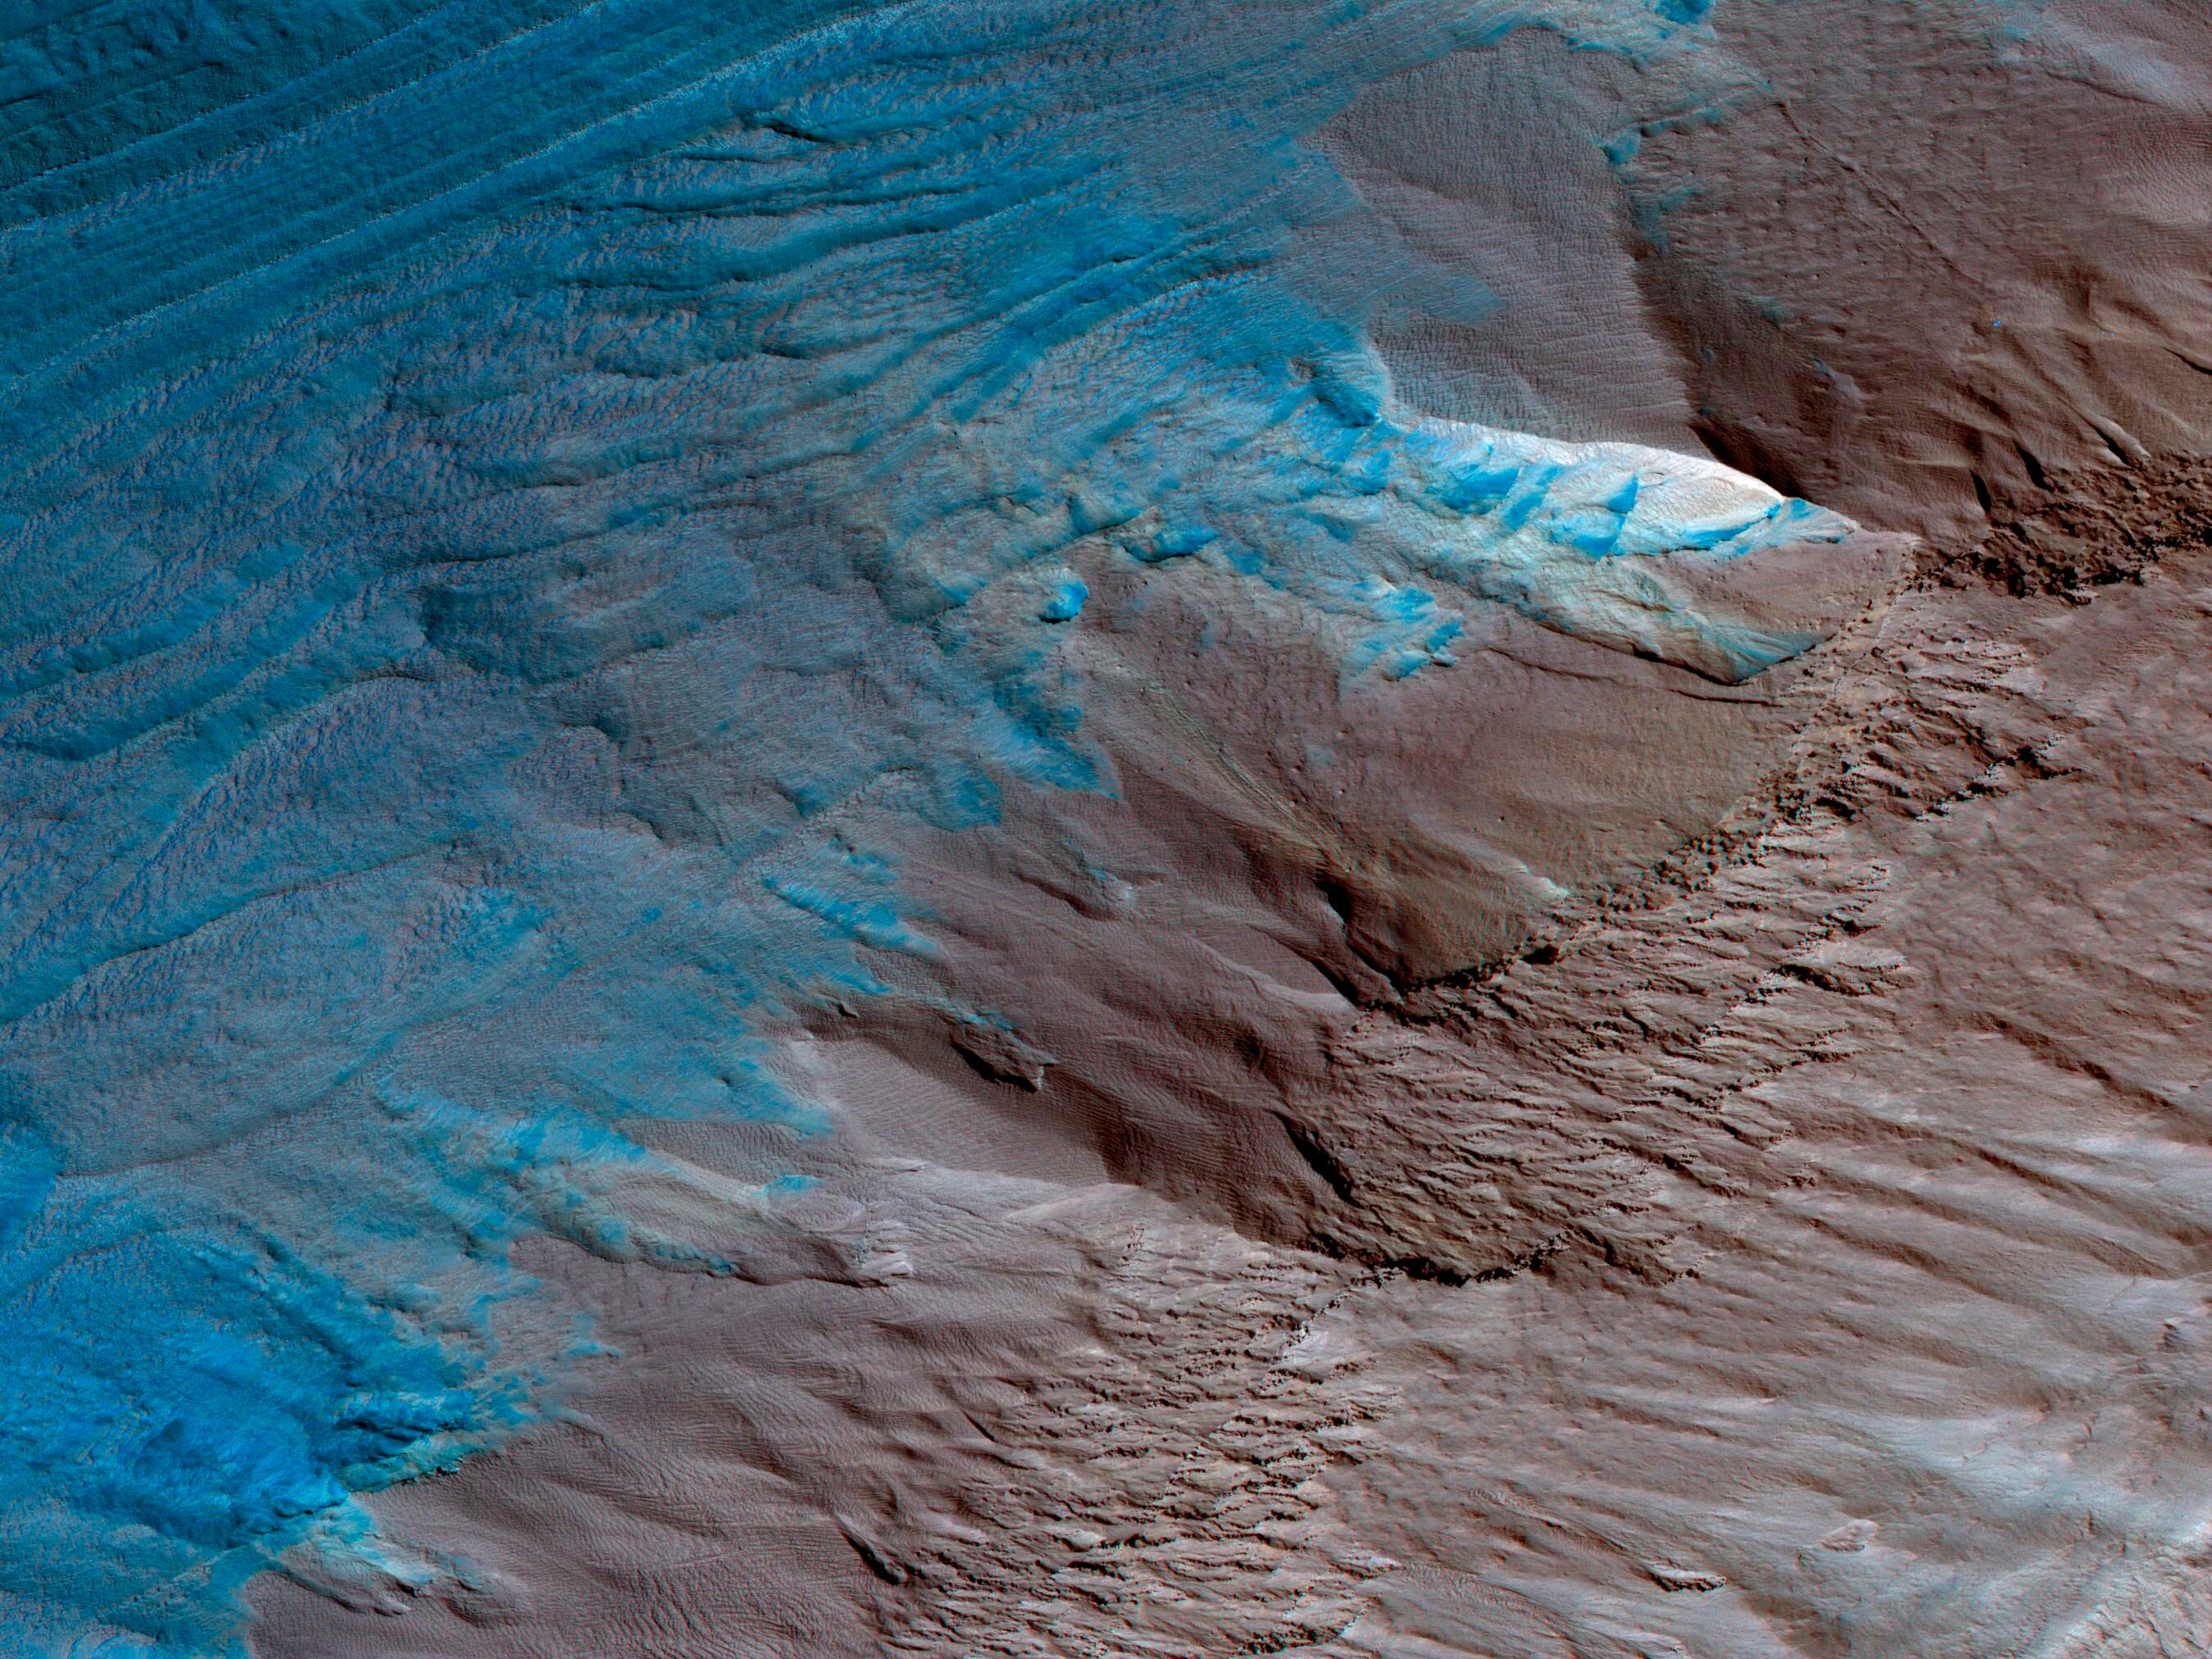 This image was taken by NASA's Mars Reconnaissance Orbiter on the South Pole in May 2017.